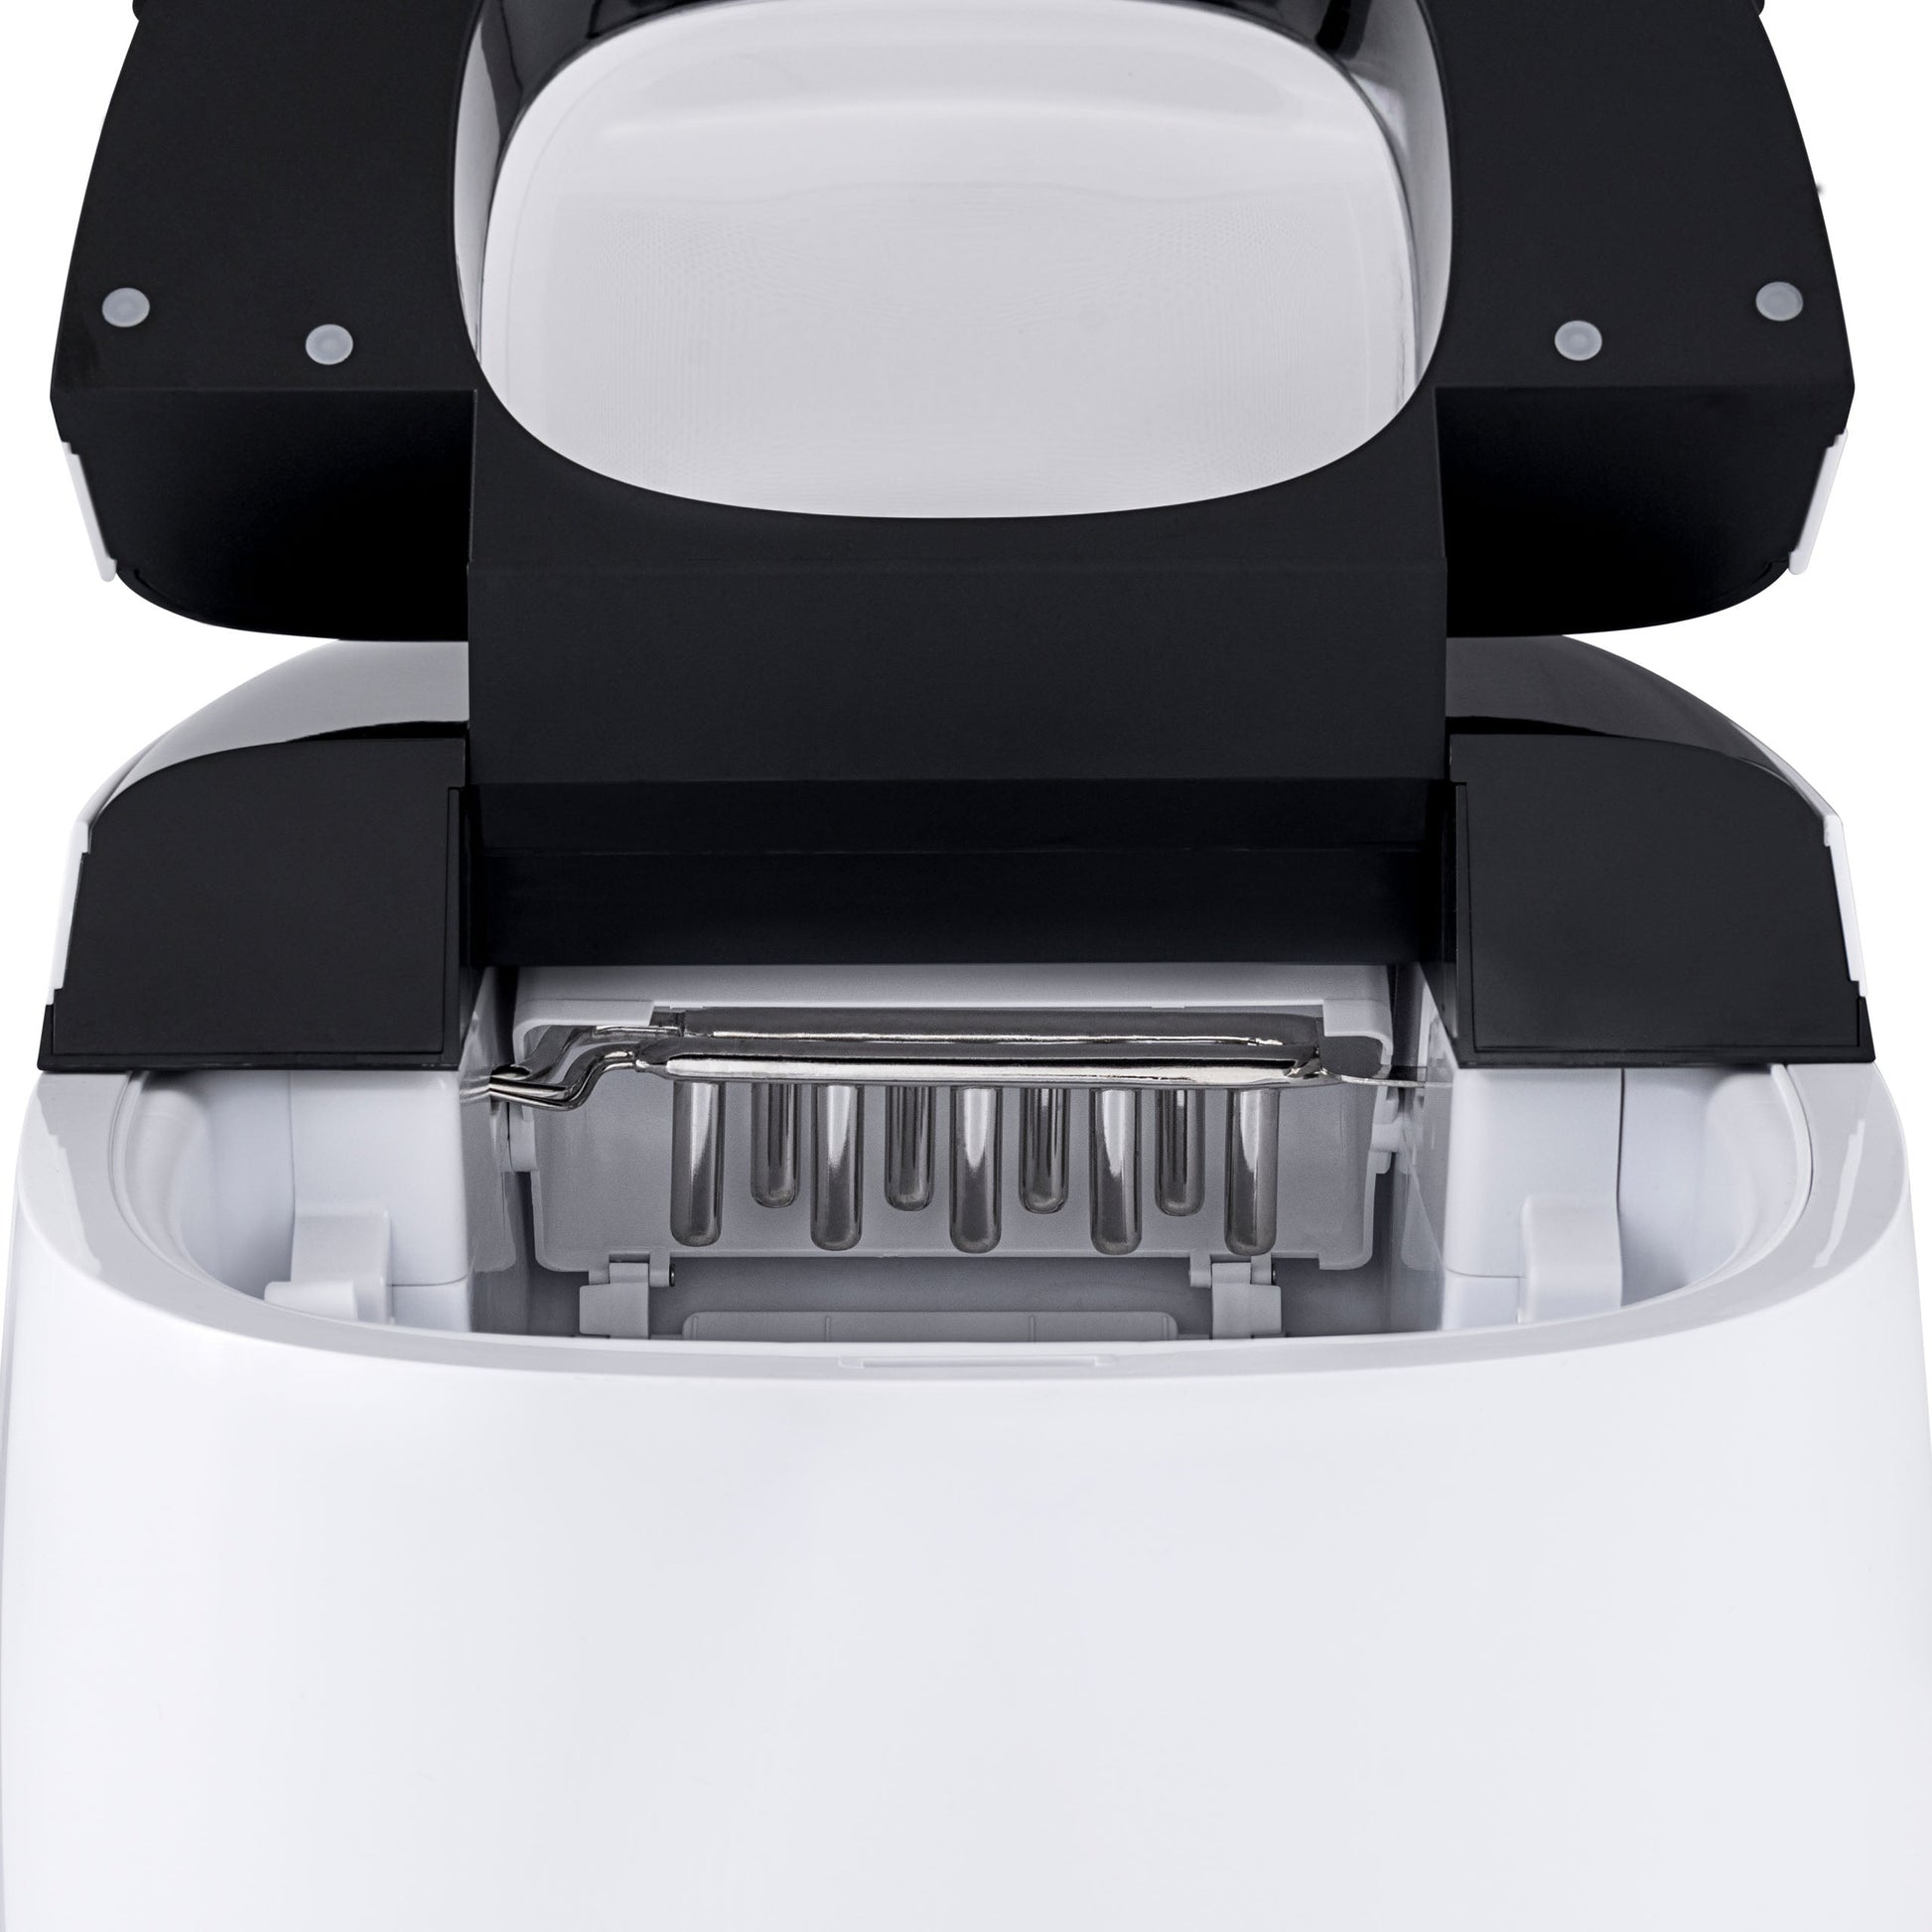 Newair Countertop Ice Maker, 50 lbs. of Ice a Day, One Button Operation and Easy to Clean BPA-Free Parts